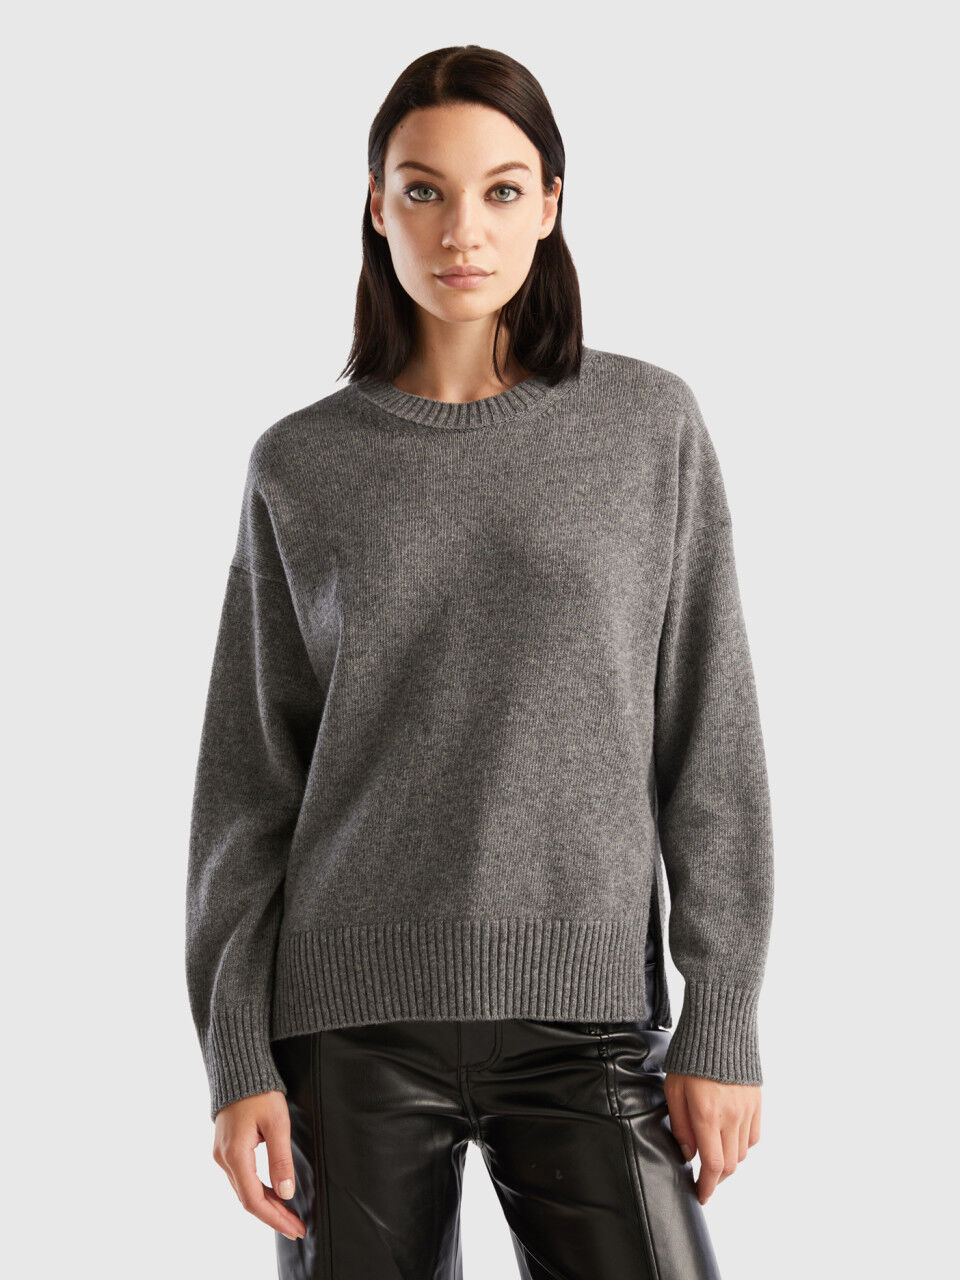 Women's Crew Neck Sweaters and Jumpers | Benetton